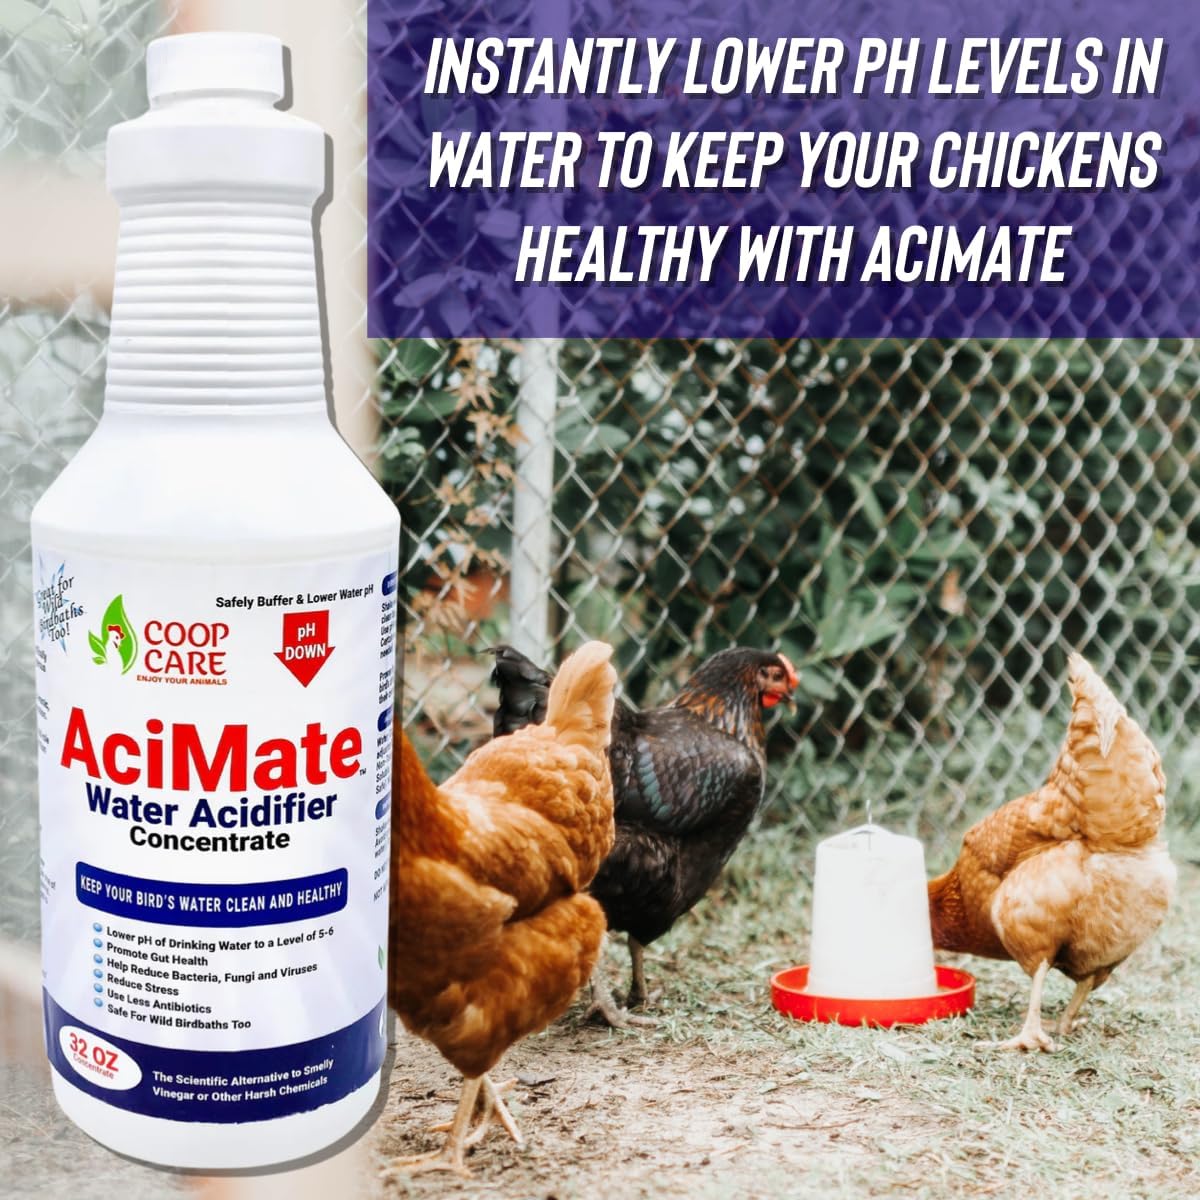 AciMate Water Acidifier Conc. w/ pH Test Strips – Optimize Water pH, No Algae Growth Waterers. 10x Stronger than Apple Cider Vinegar! Pleasant Taste